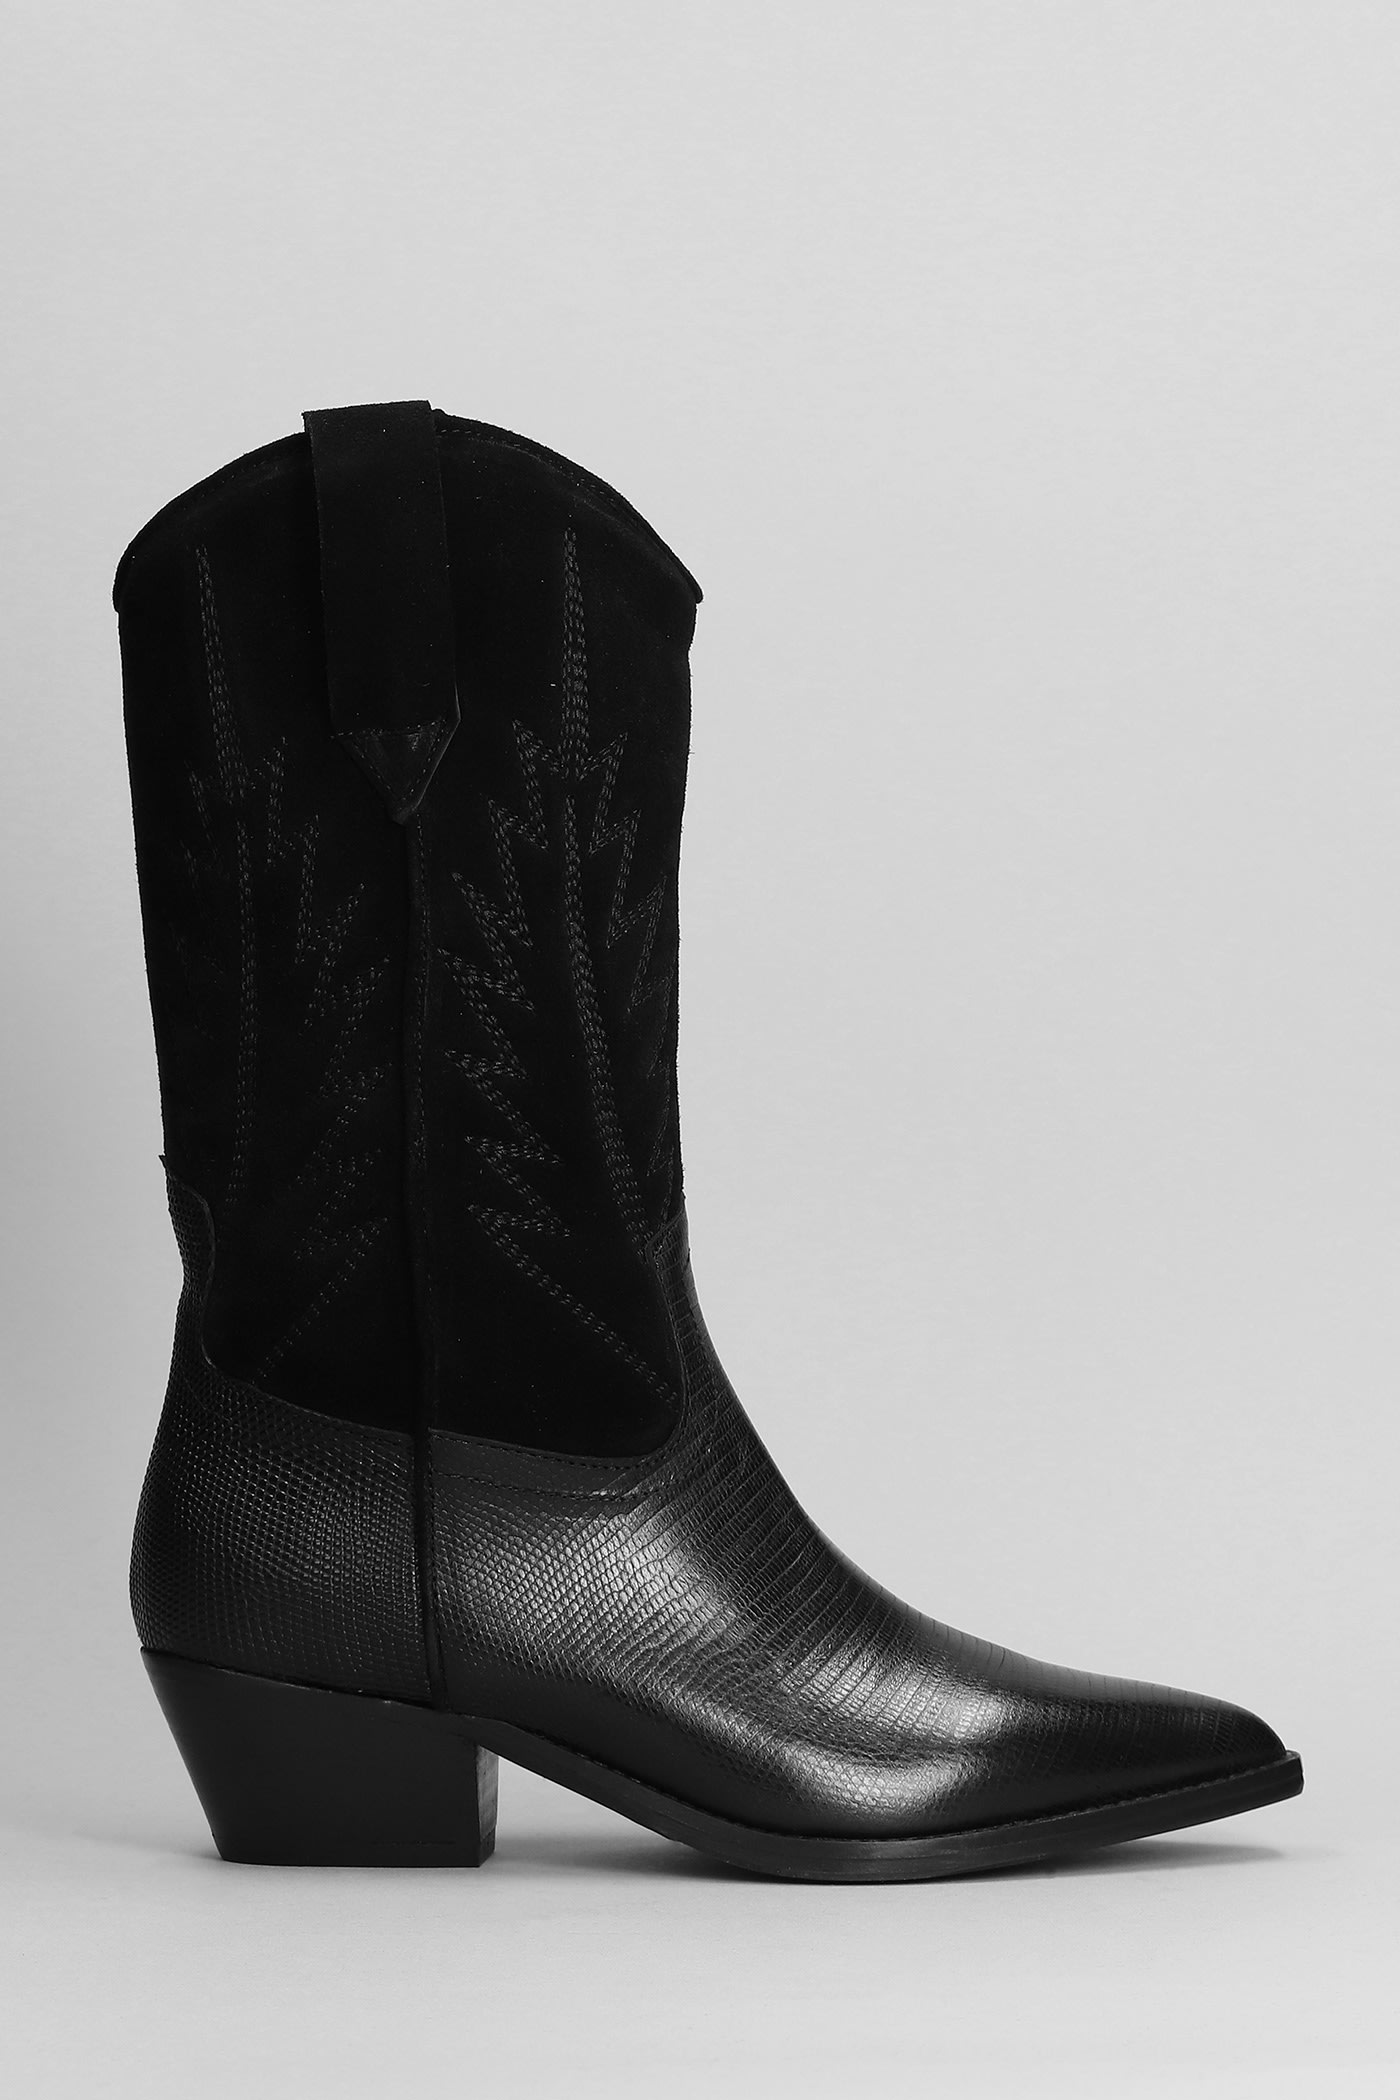 Texan Boots In Black Suede And Leather